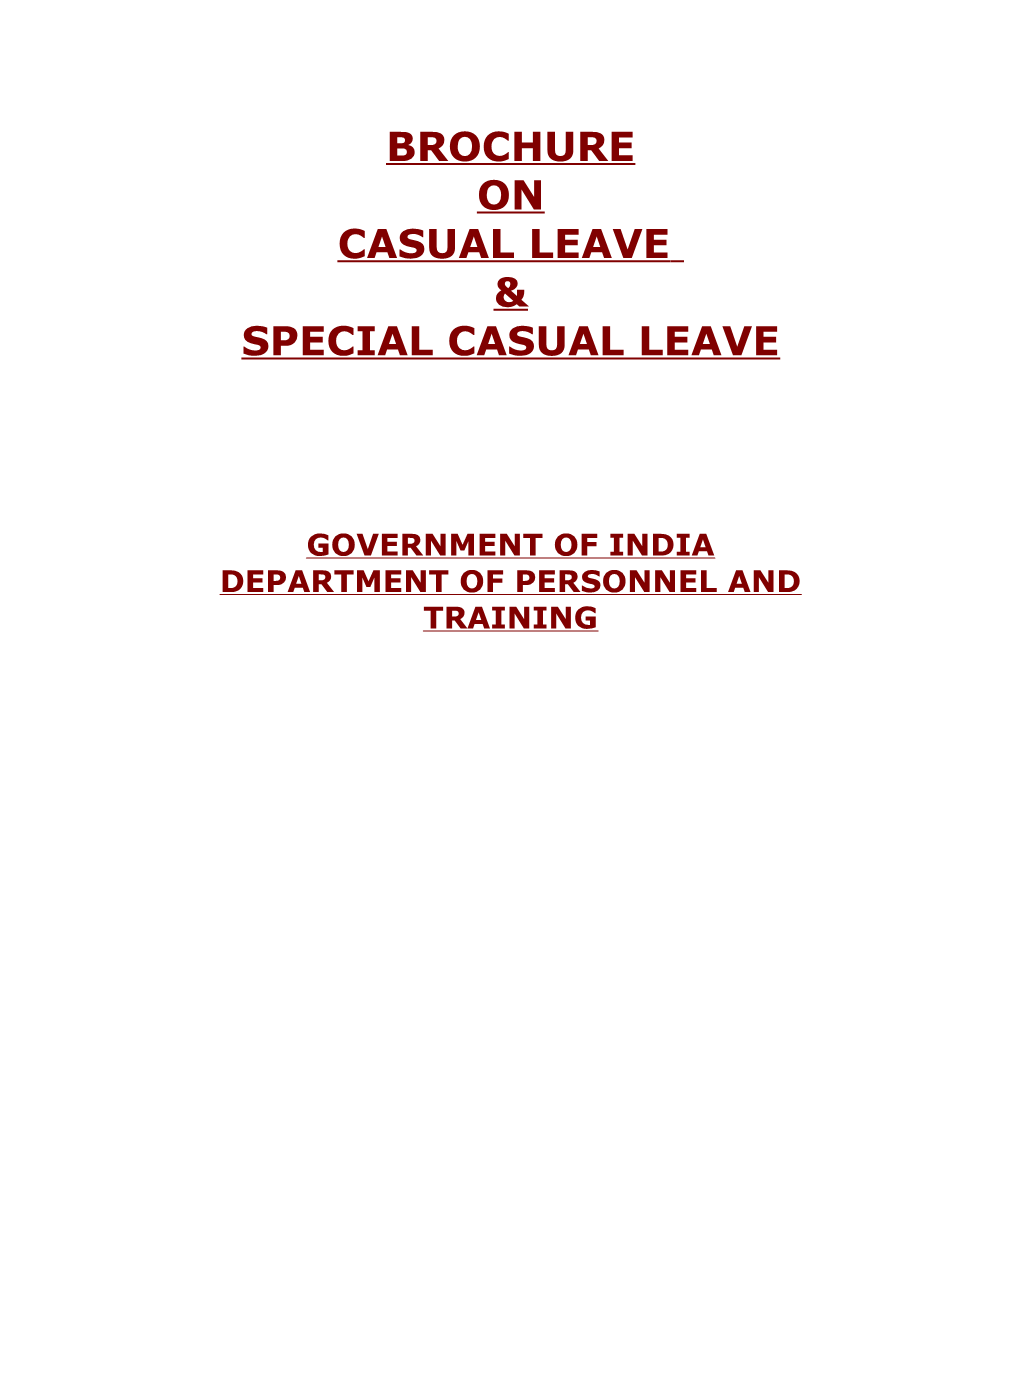 Government of India Department of Personnel and Training